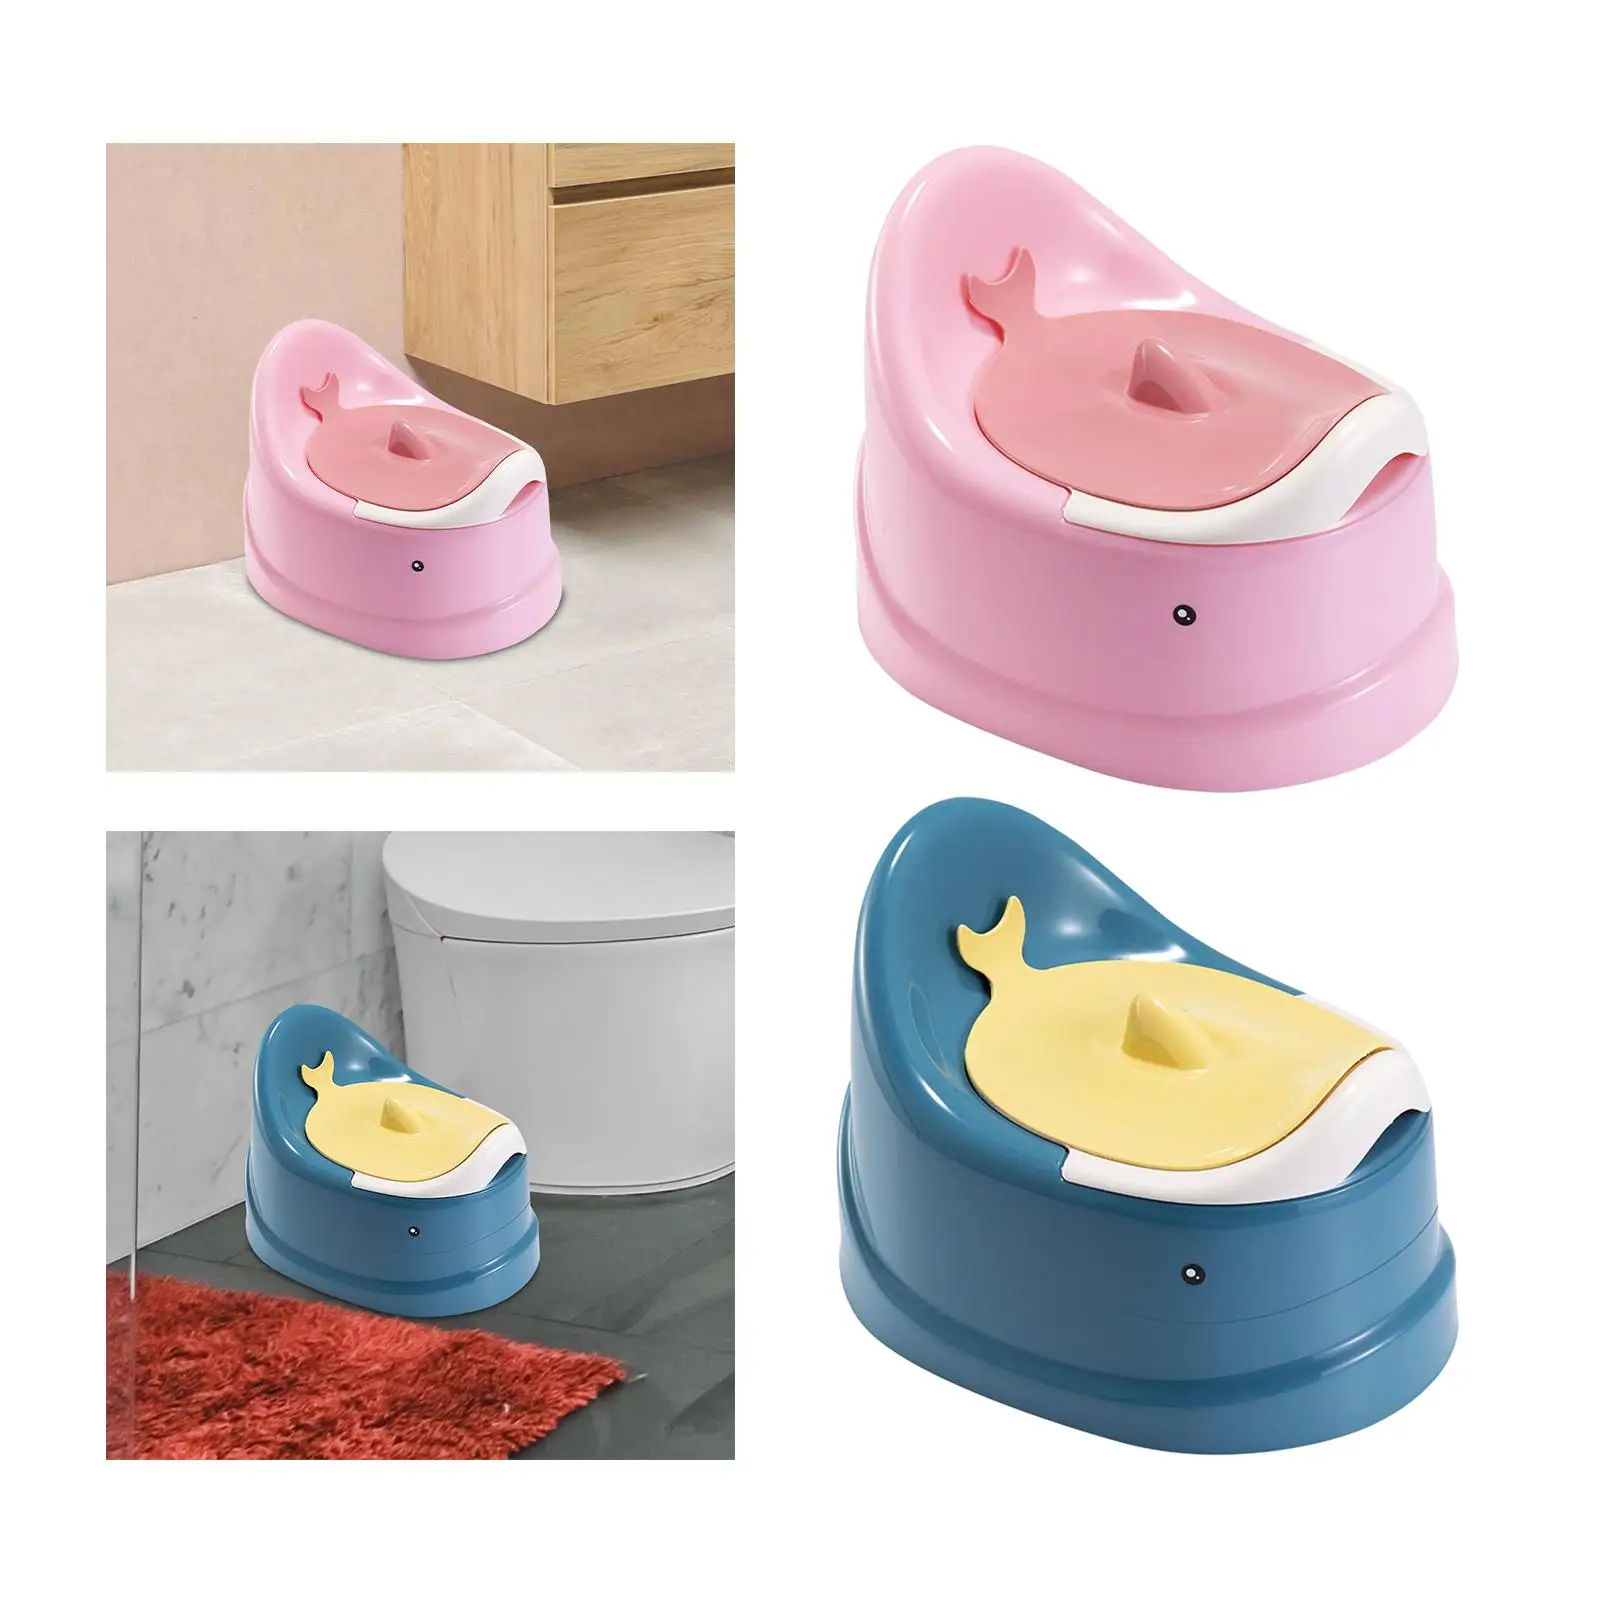 Potty Training Toilet Indoor Travel Adorable AntiSlip with Handle Comfortable with Lid Removable for Girls Boys Child Potty Seat